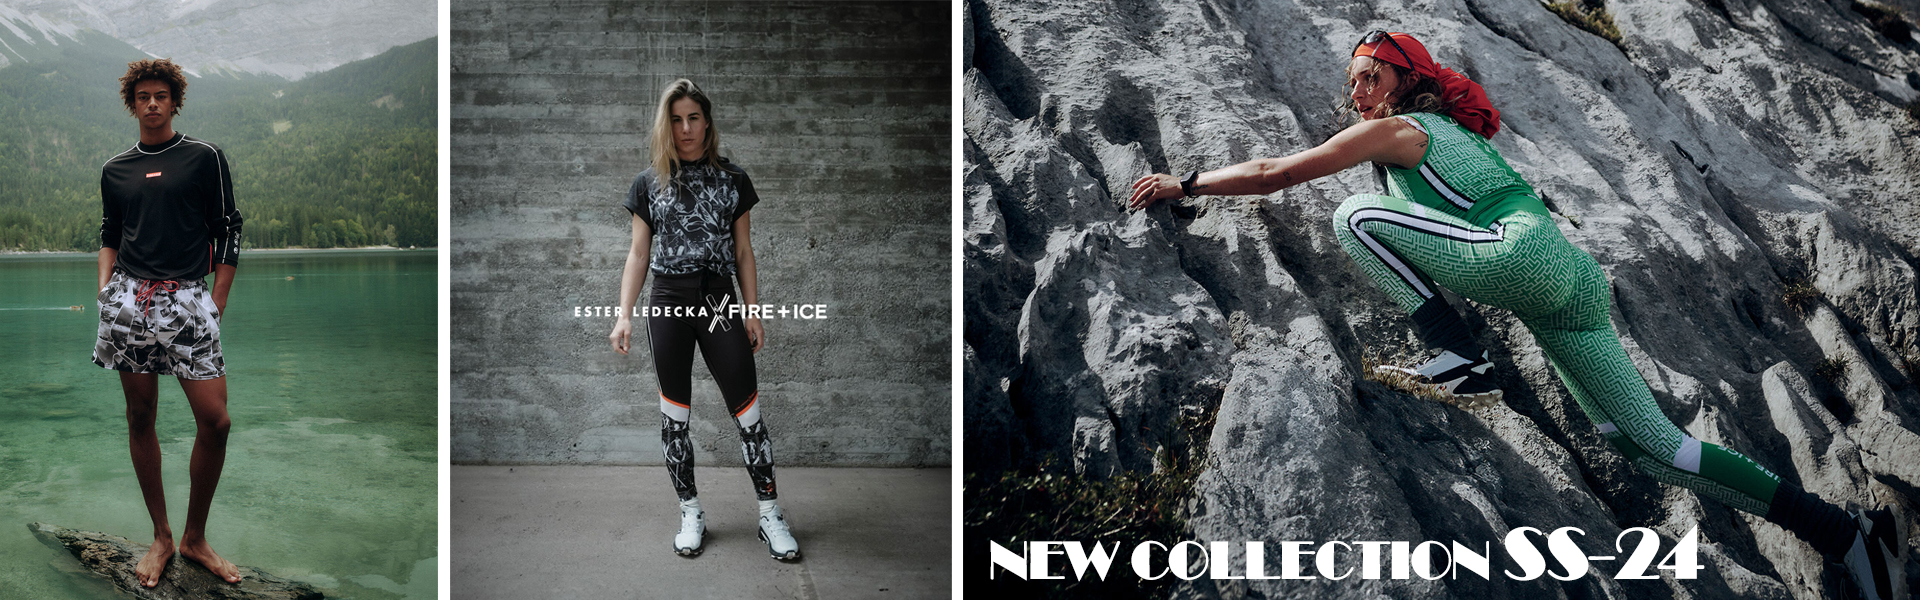 Bogner Fire+Ice new collection